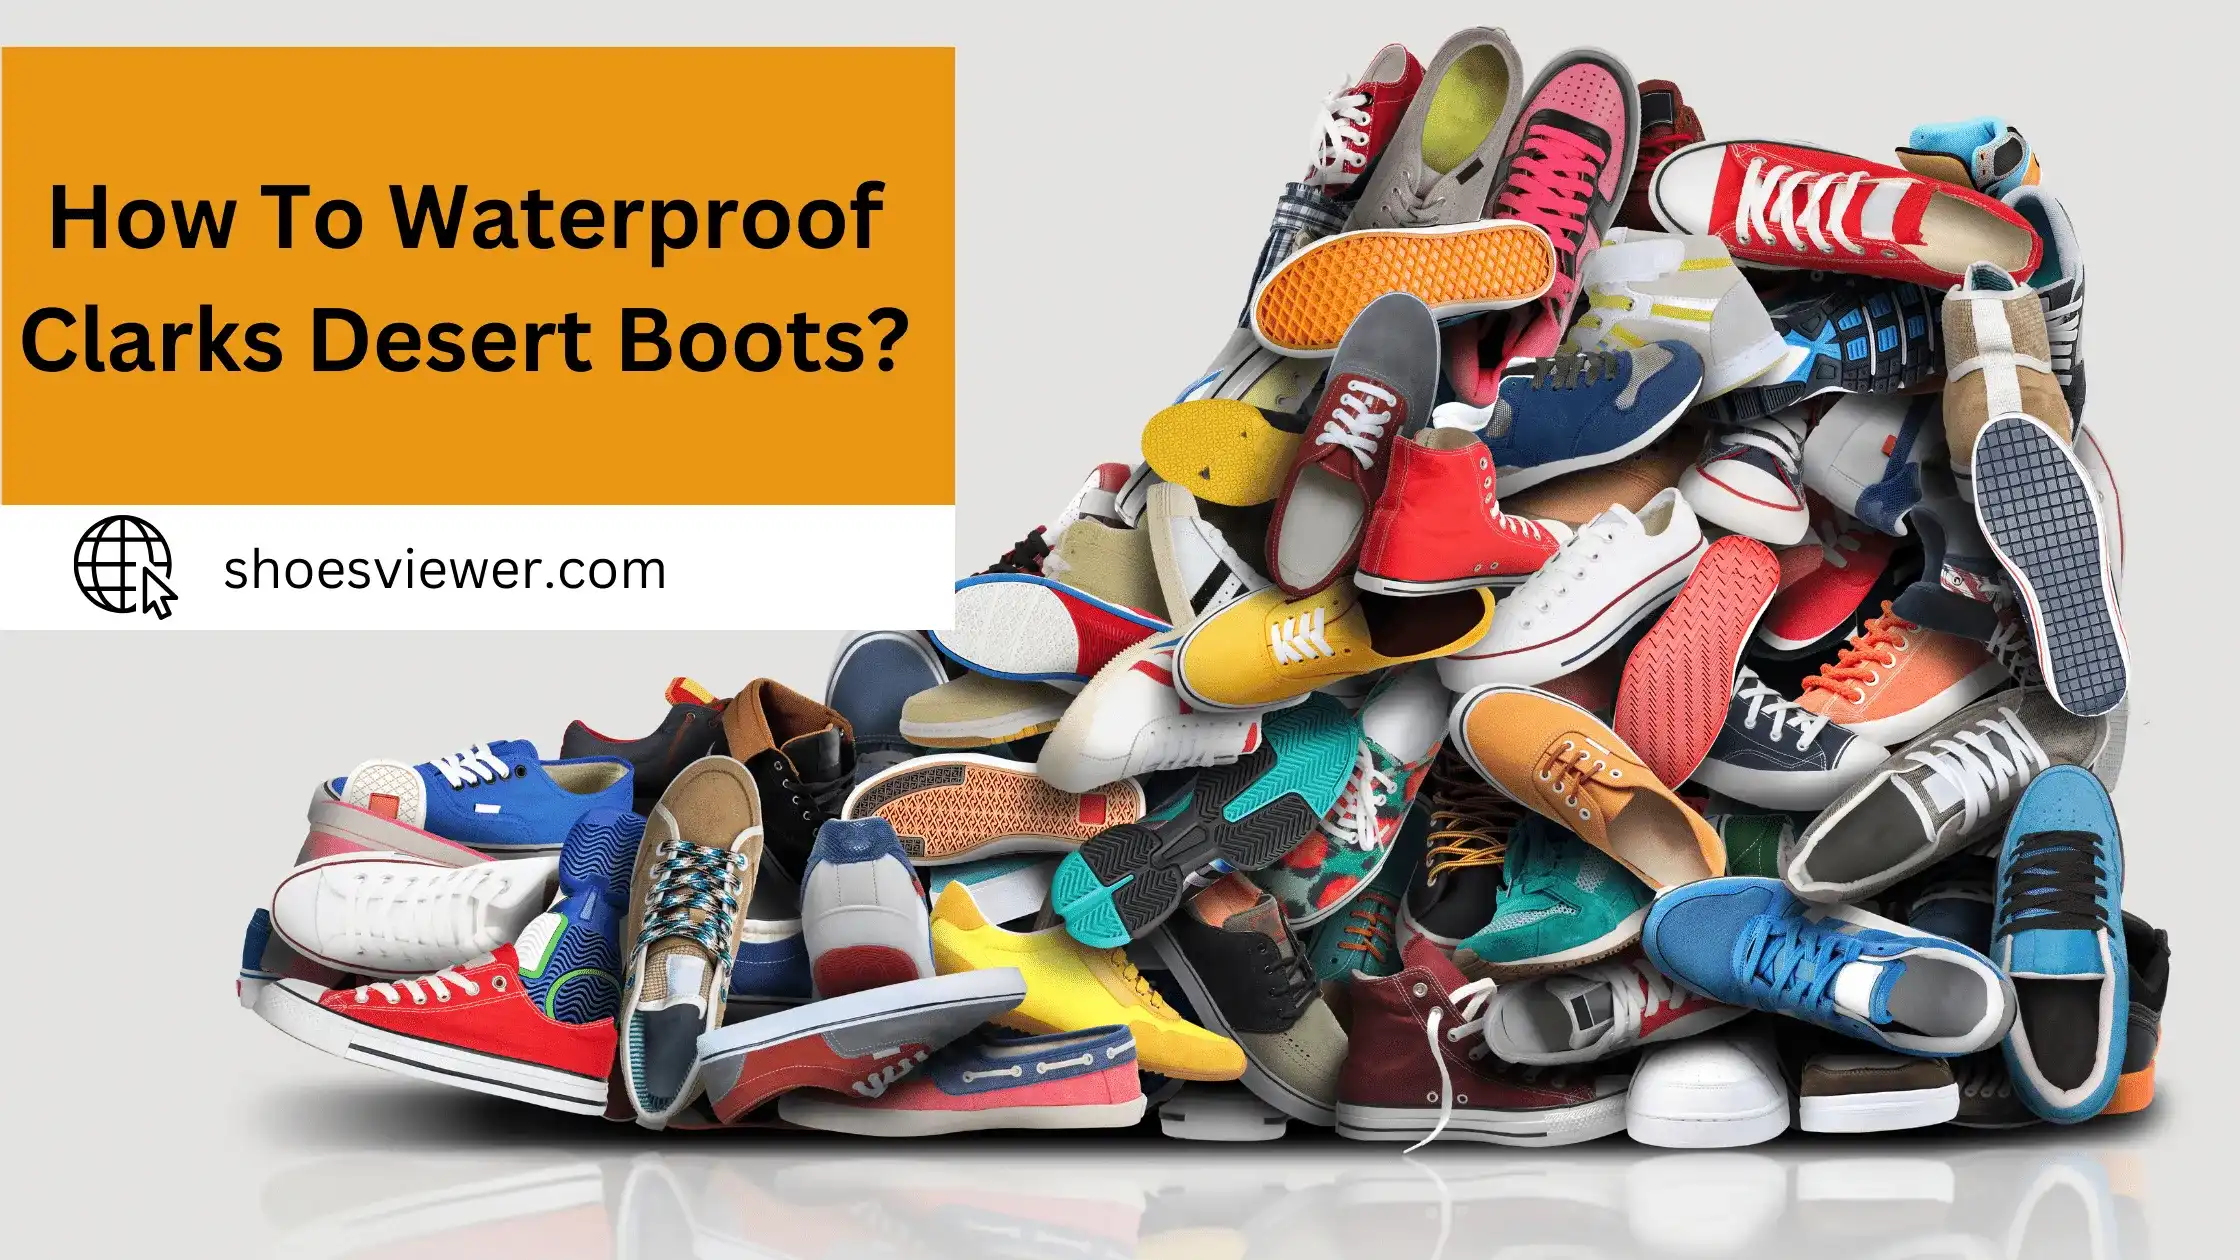 How To Waterproof Clarks Desert Boots? Pro Tips And Tricks